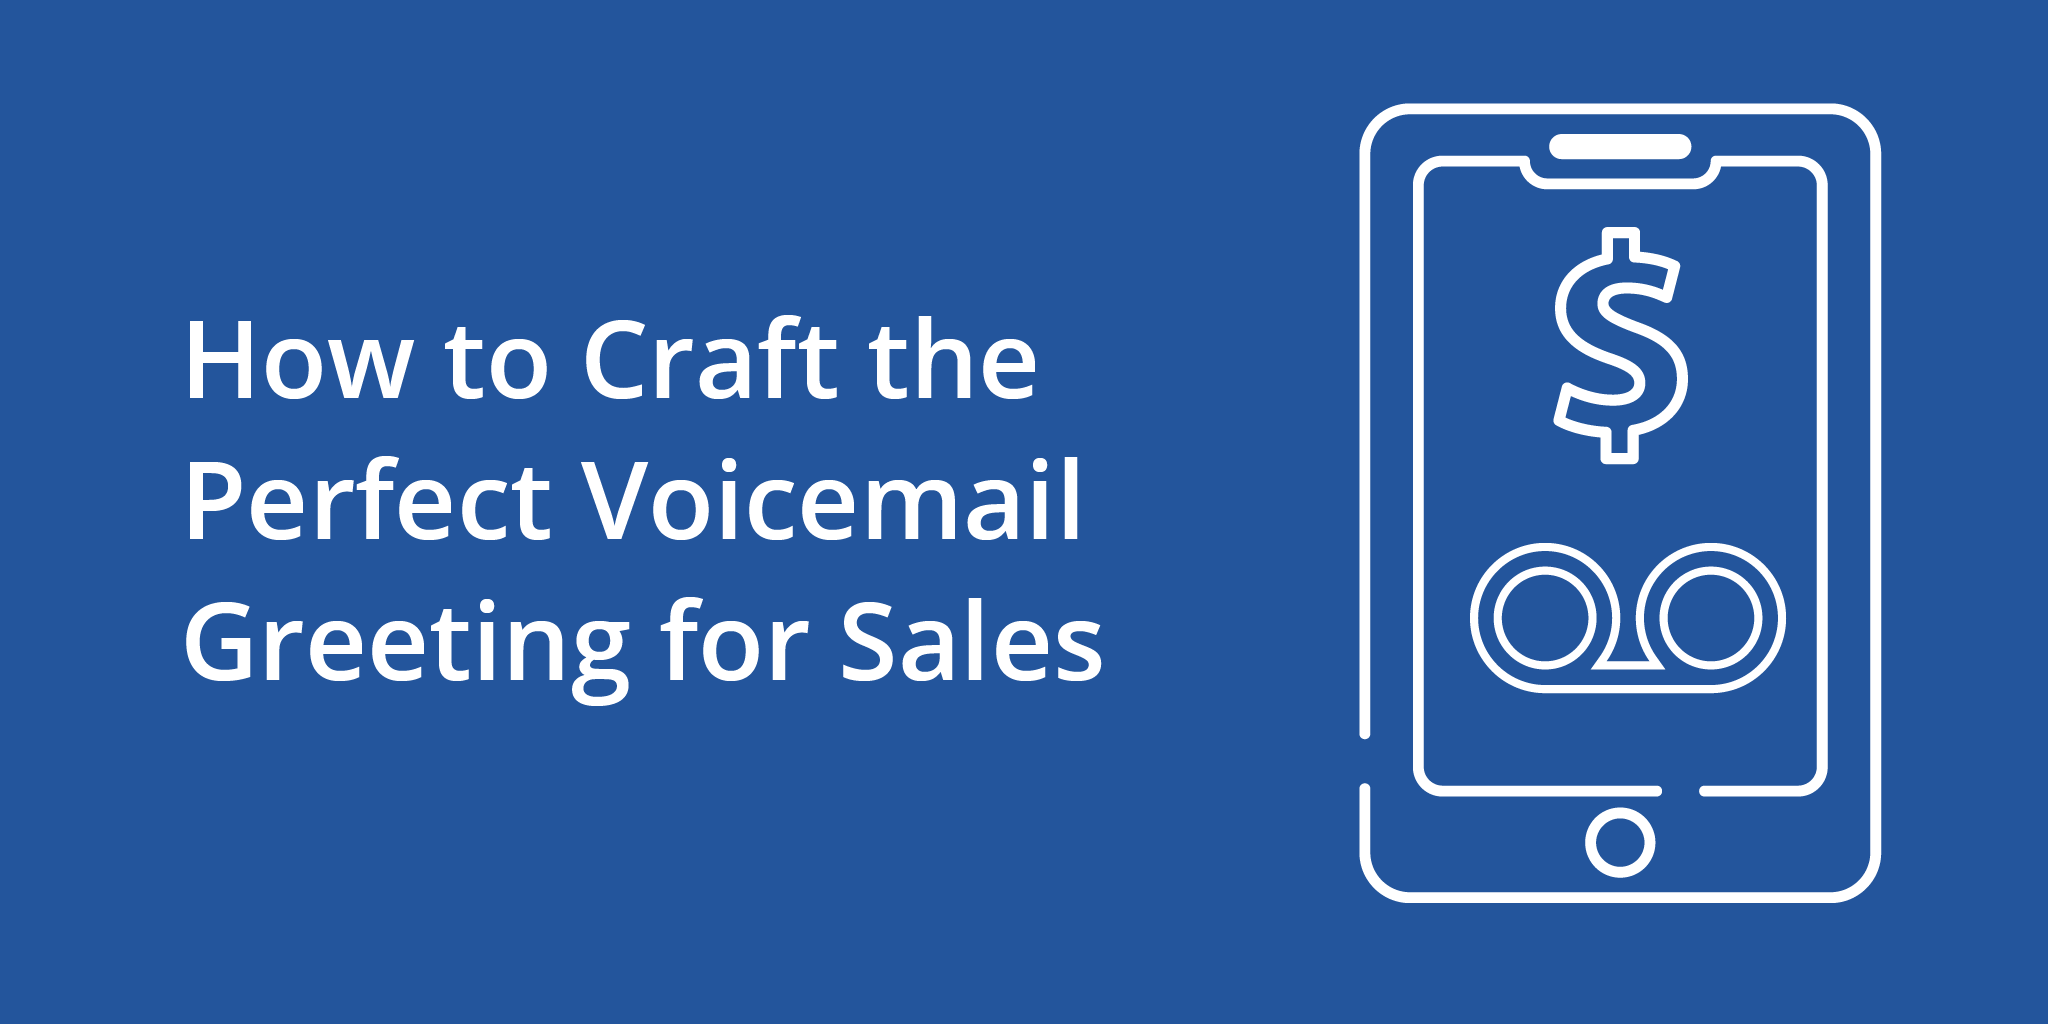 How to Craft the Perfect Voicemail Greeting for Sales | Telephones for business